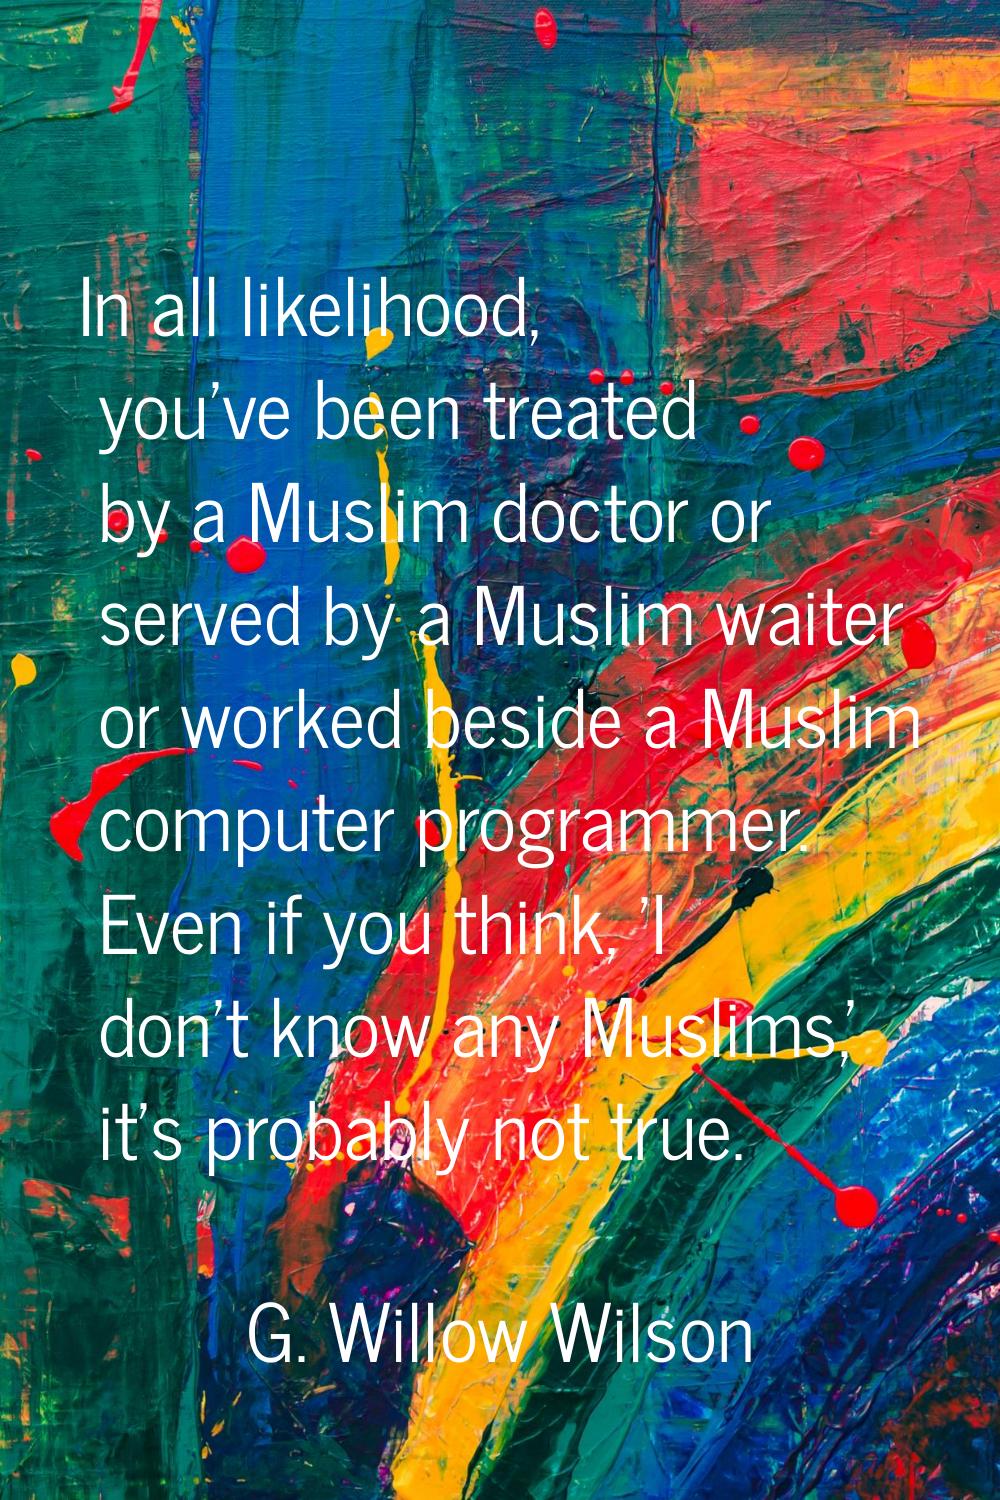 In all likelihood, you've been treated by a Muslim doctor or served by a Muslim waiter or worked be